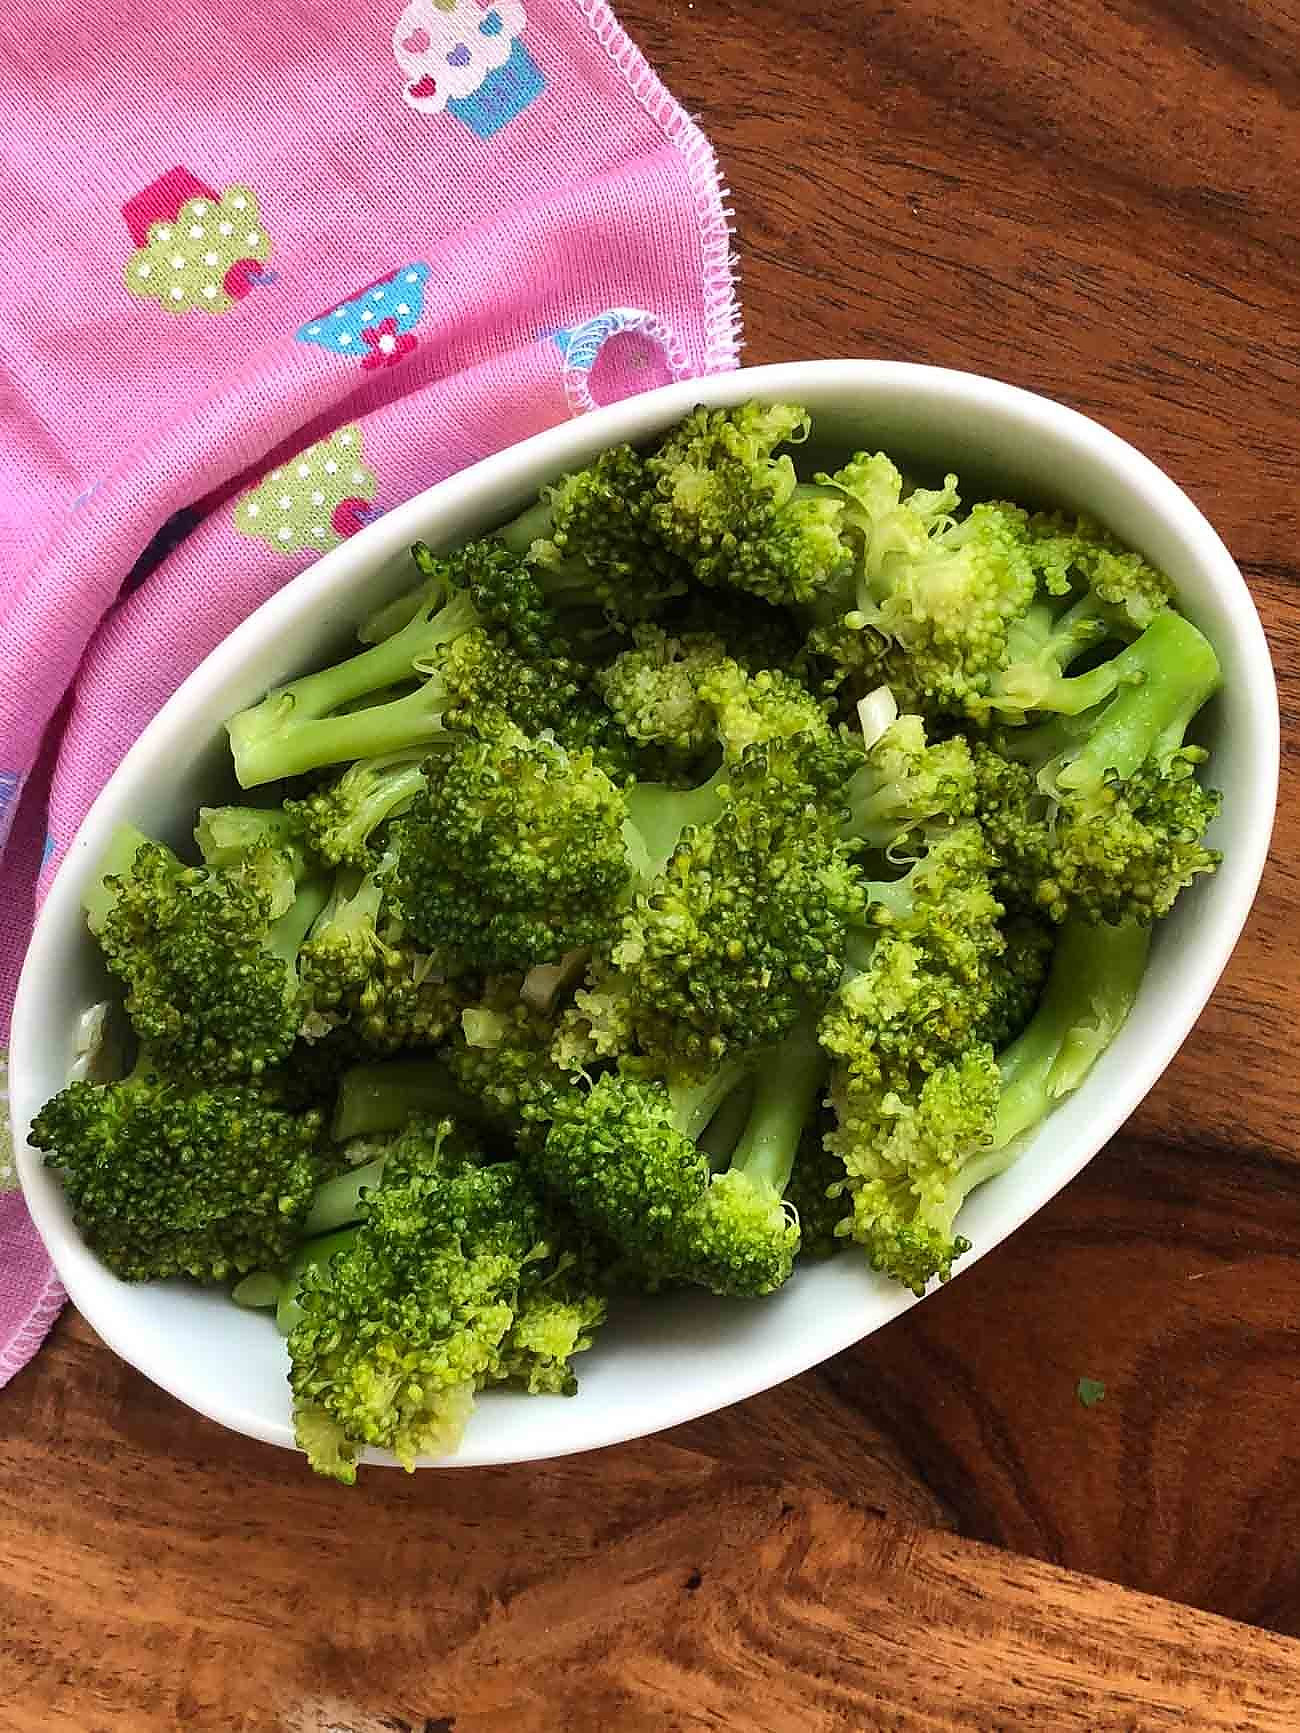 Buttered Broccoli Poriyal Sabzi Recipe - Finger Food For Babies And Toddlers